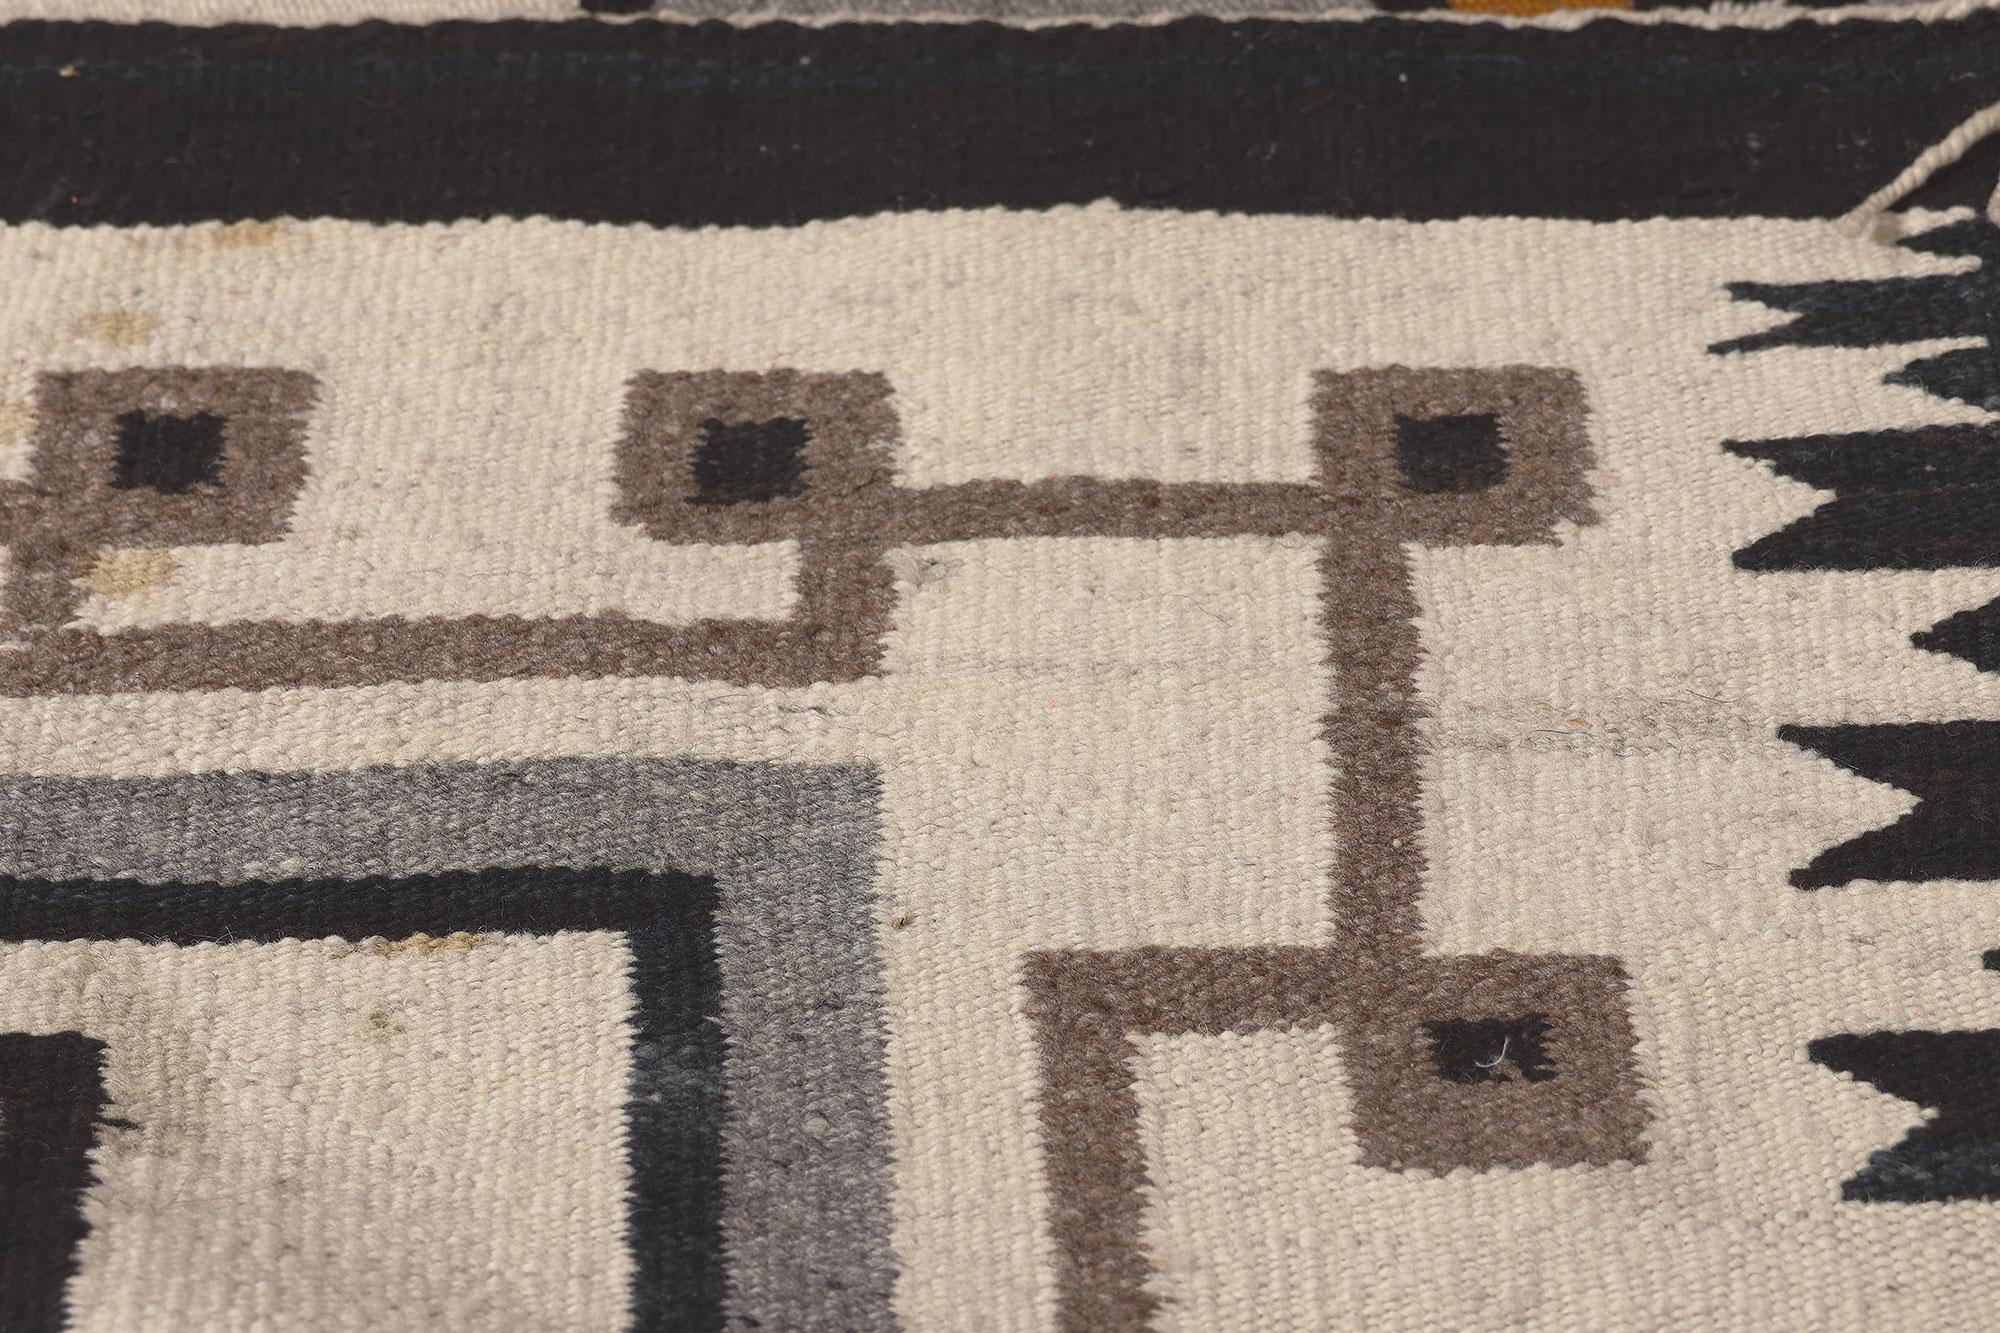 Vintage Two Grey Hills Navajo Rug, Organic Modern Meets Subtle Southwest In Good Condition For Sale In Dallas, TX